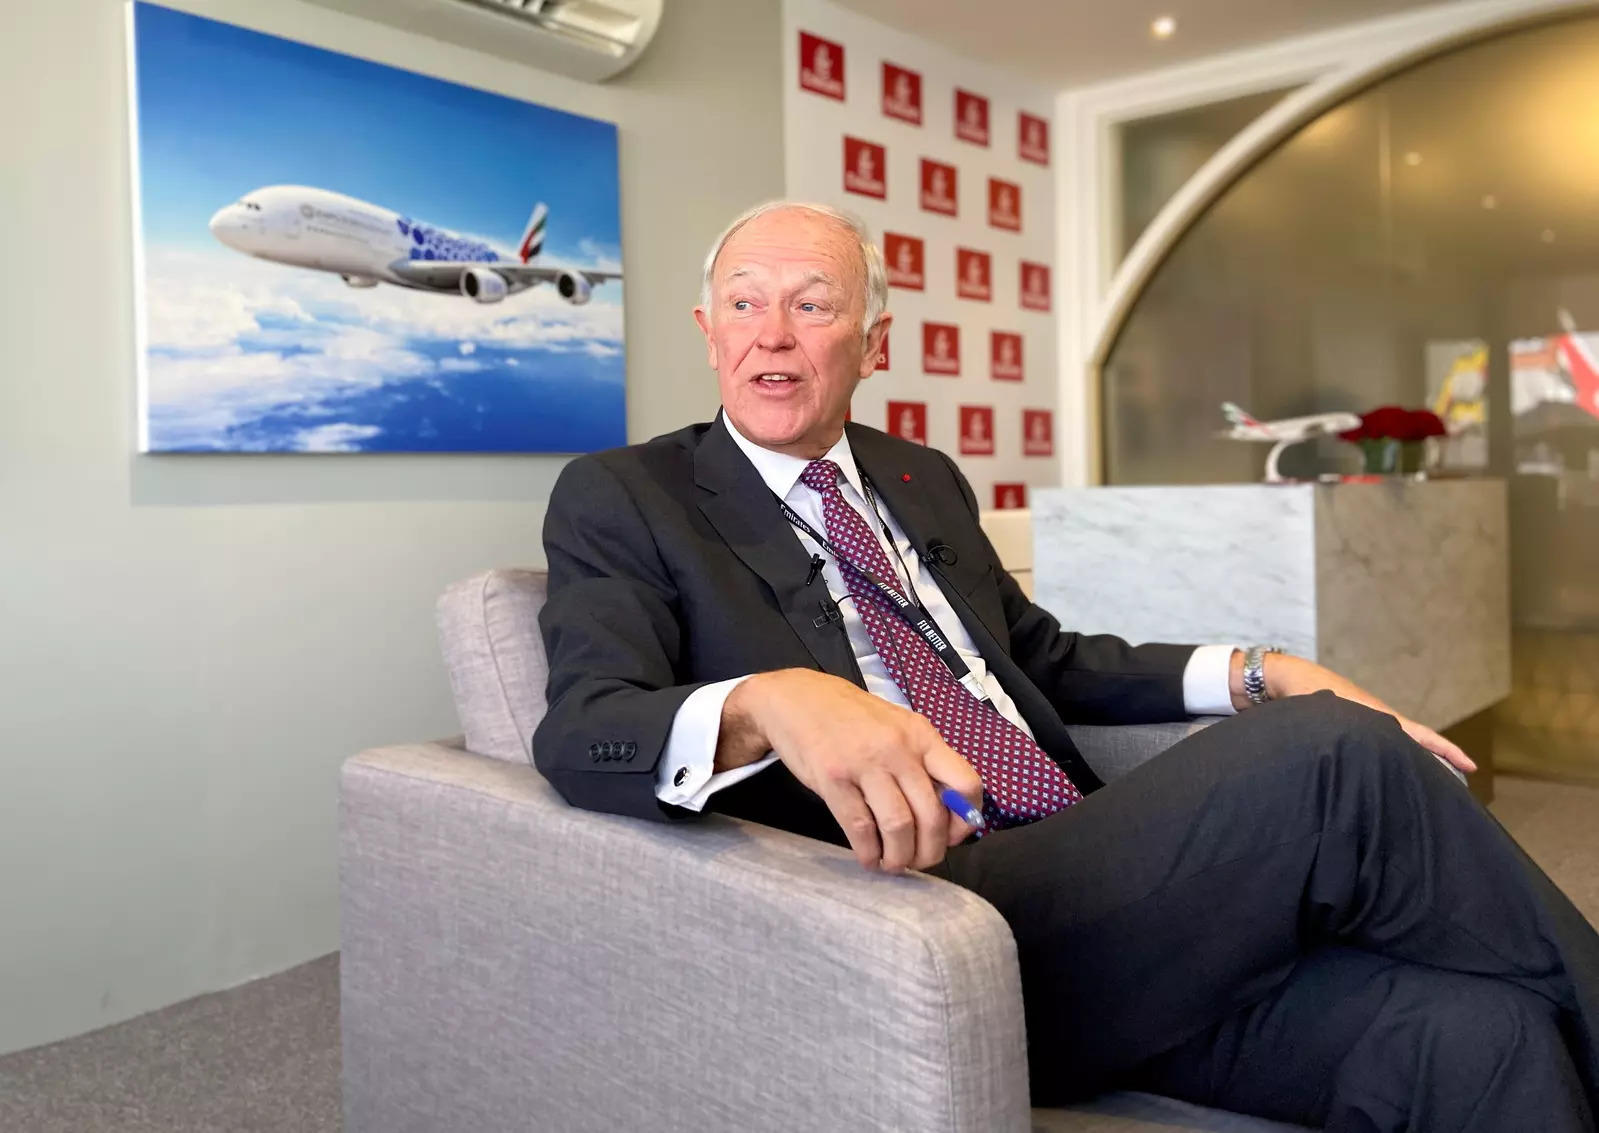 Emirates boss sees airline's future in aviation hub model